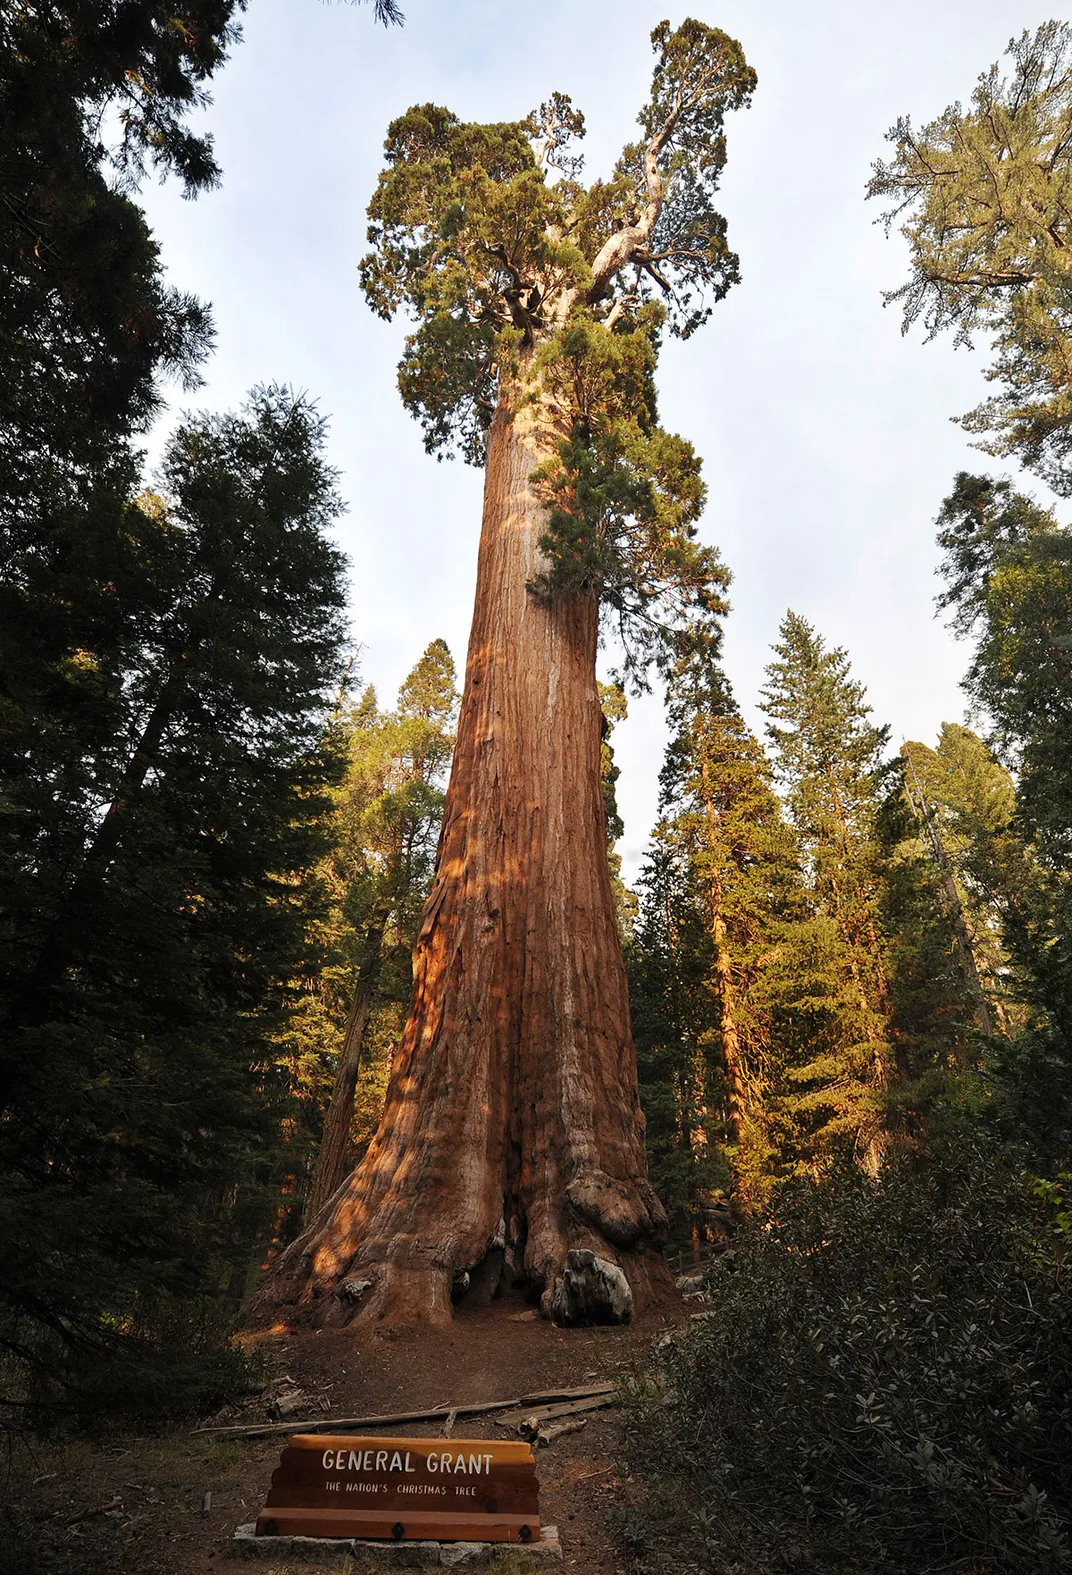 The Giant Sequoia General Grant